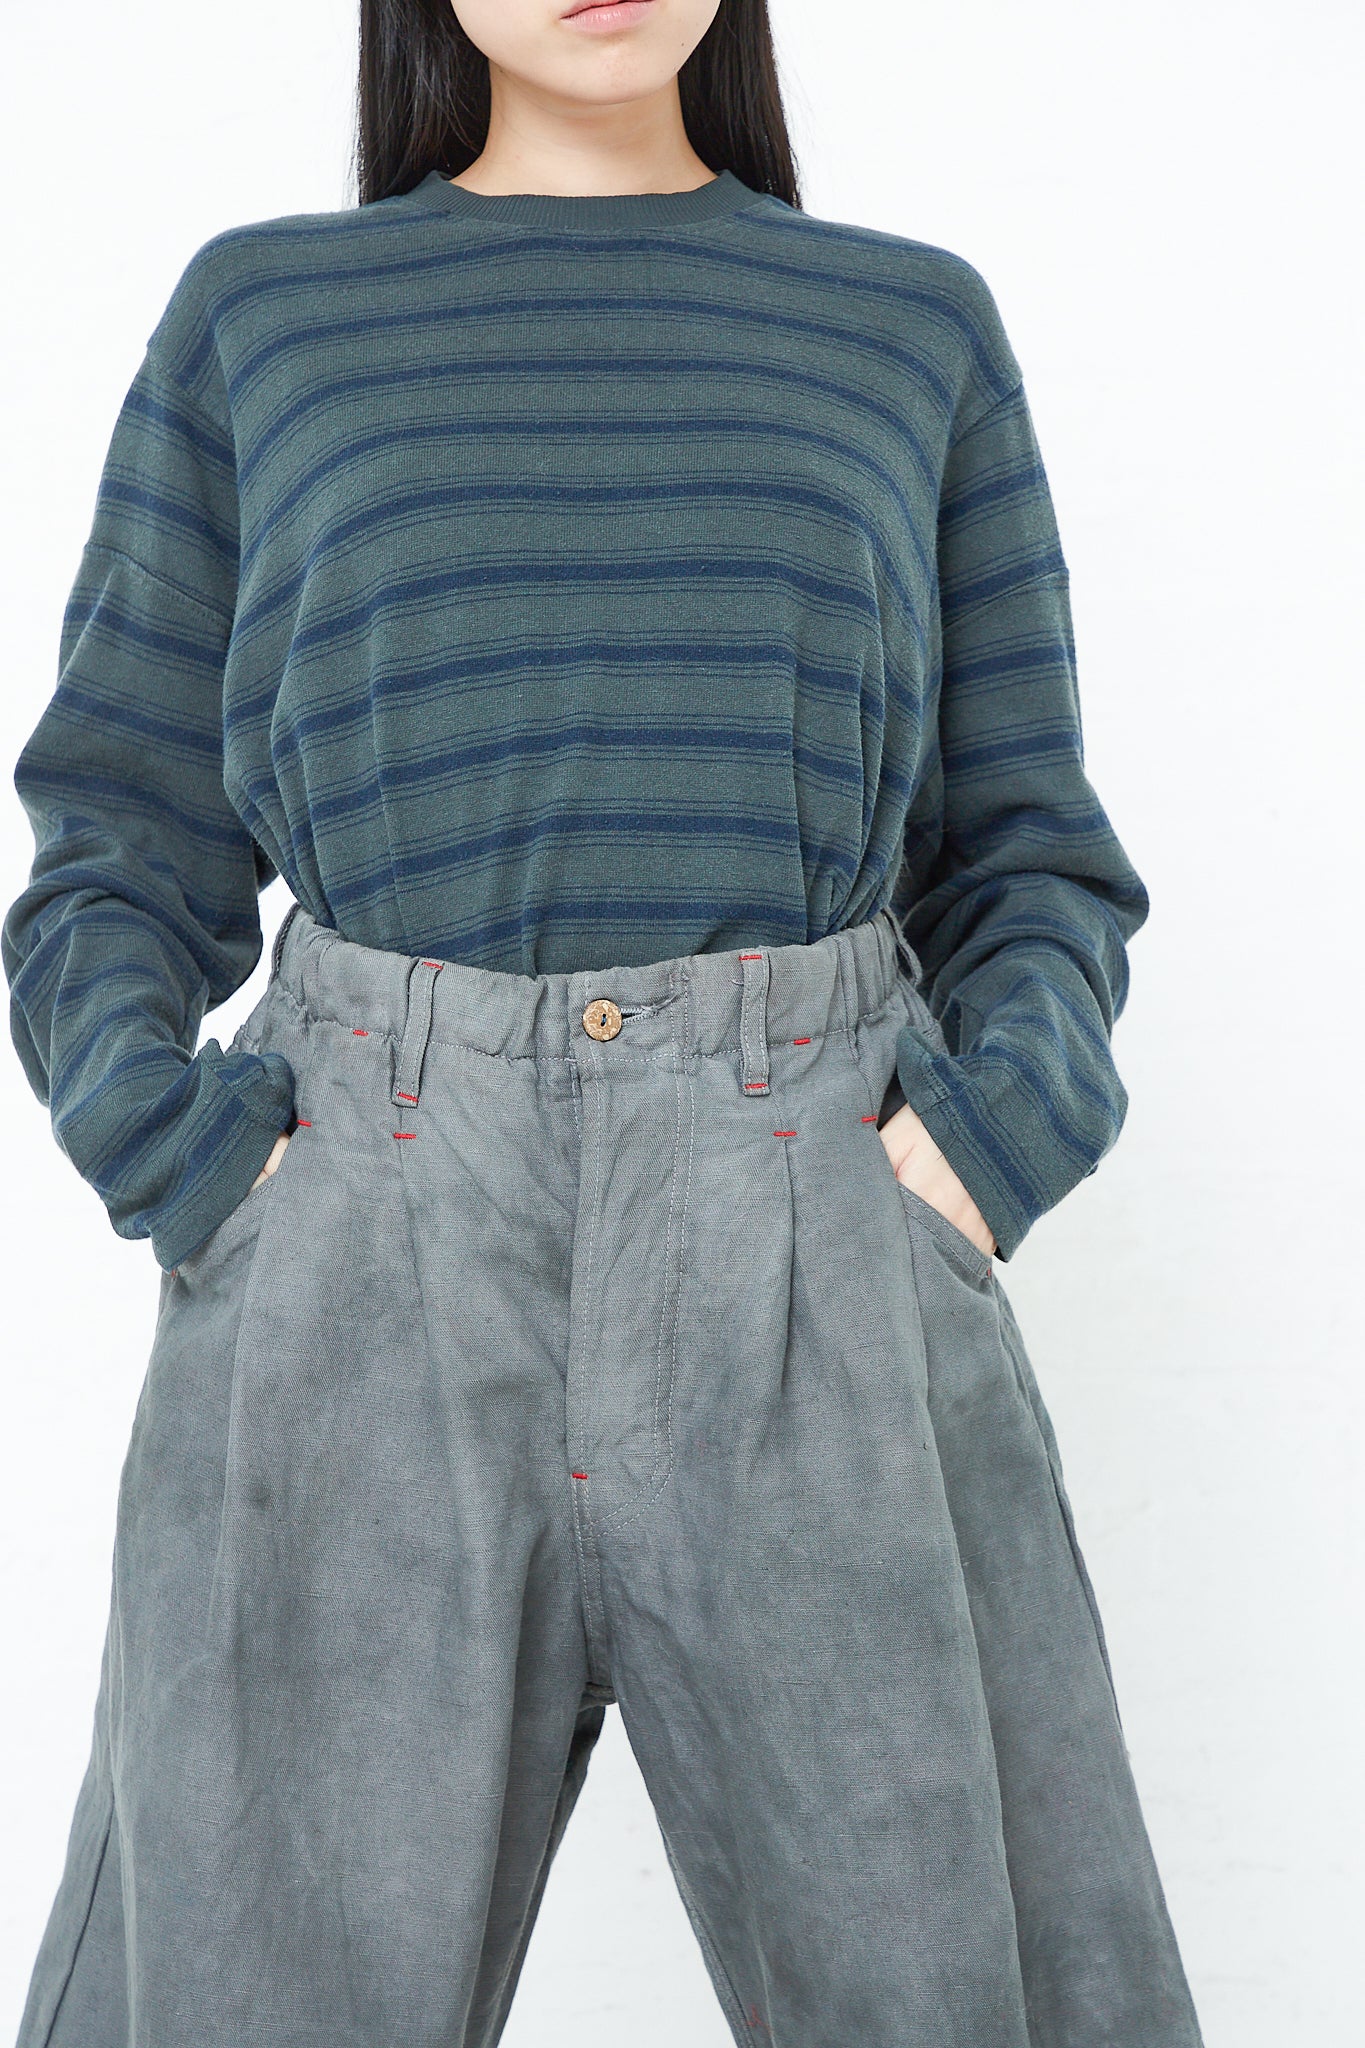 A woman wearing a striped sweater and relaxed fit pants, specifically the 9 oz. Cotton and Hemp P40 Z Boys Military Pant in Swiss Army by Dr. Collectors.